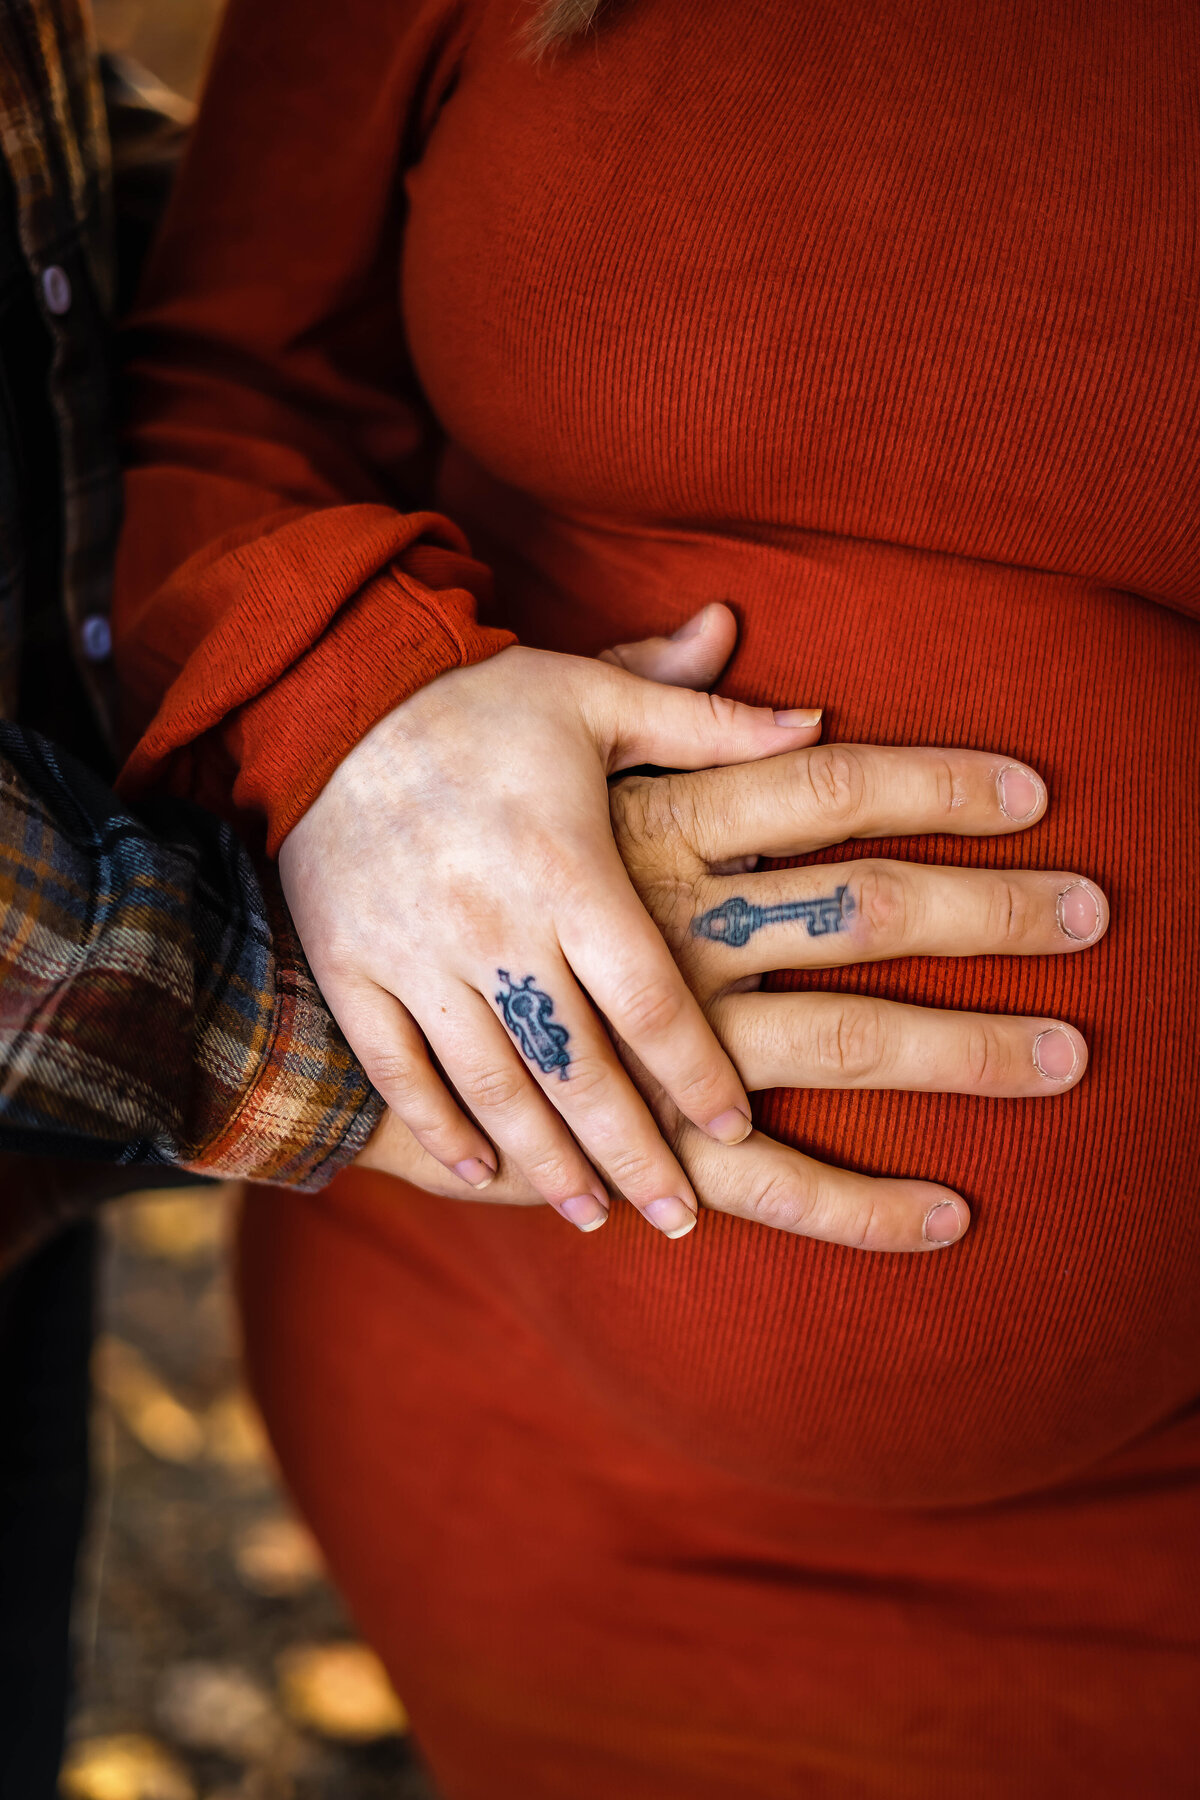 Couples hand on a pregnant belly wearing fall colors with key tattoos